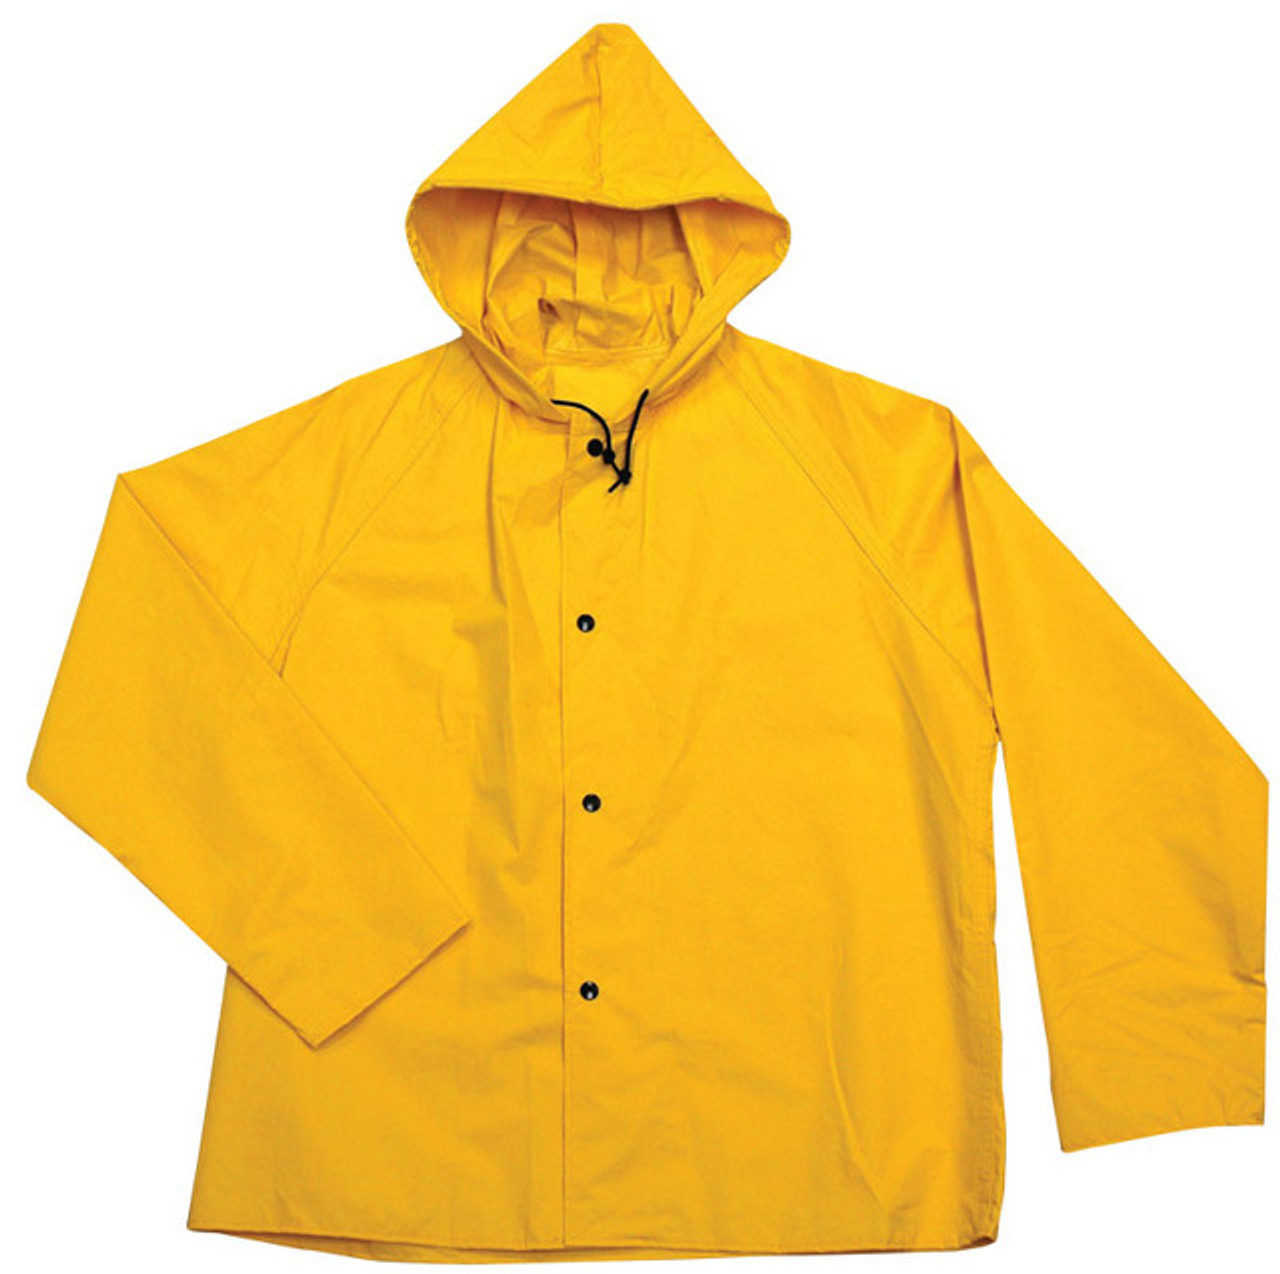 Universal 35 Jacket with Attached Hood - Rainwear | TAPCO